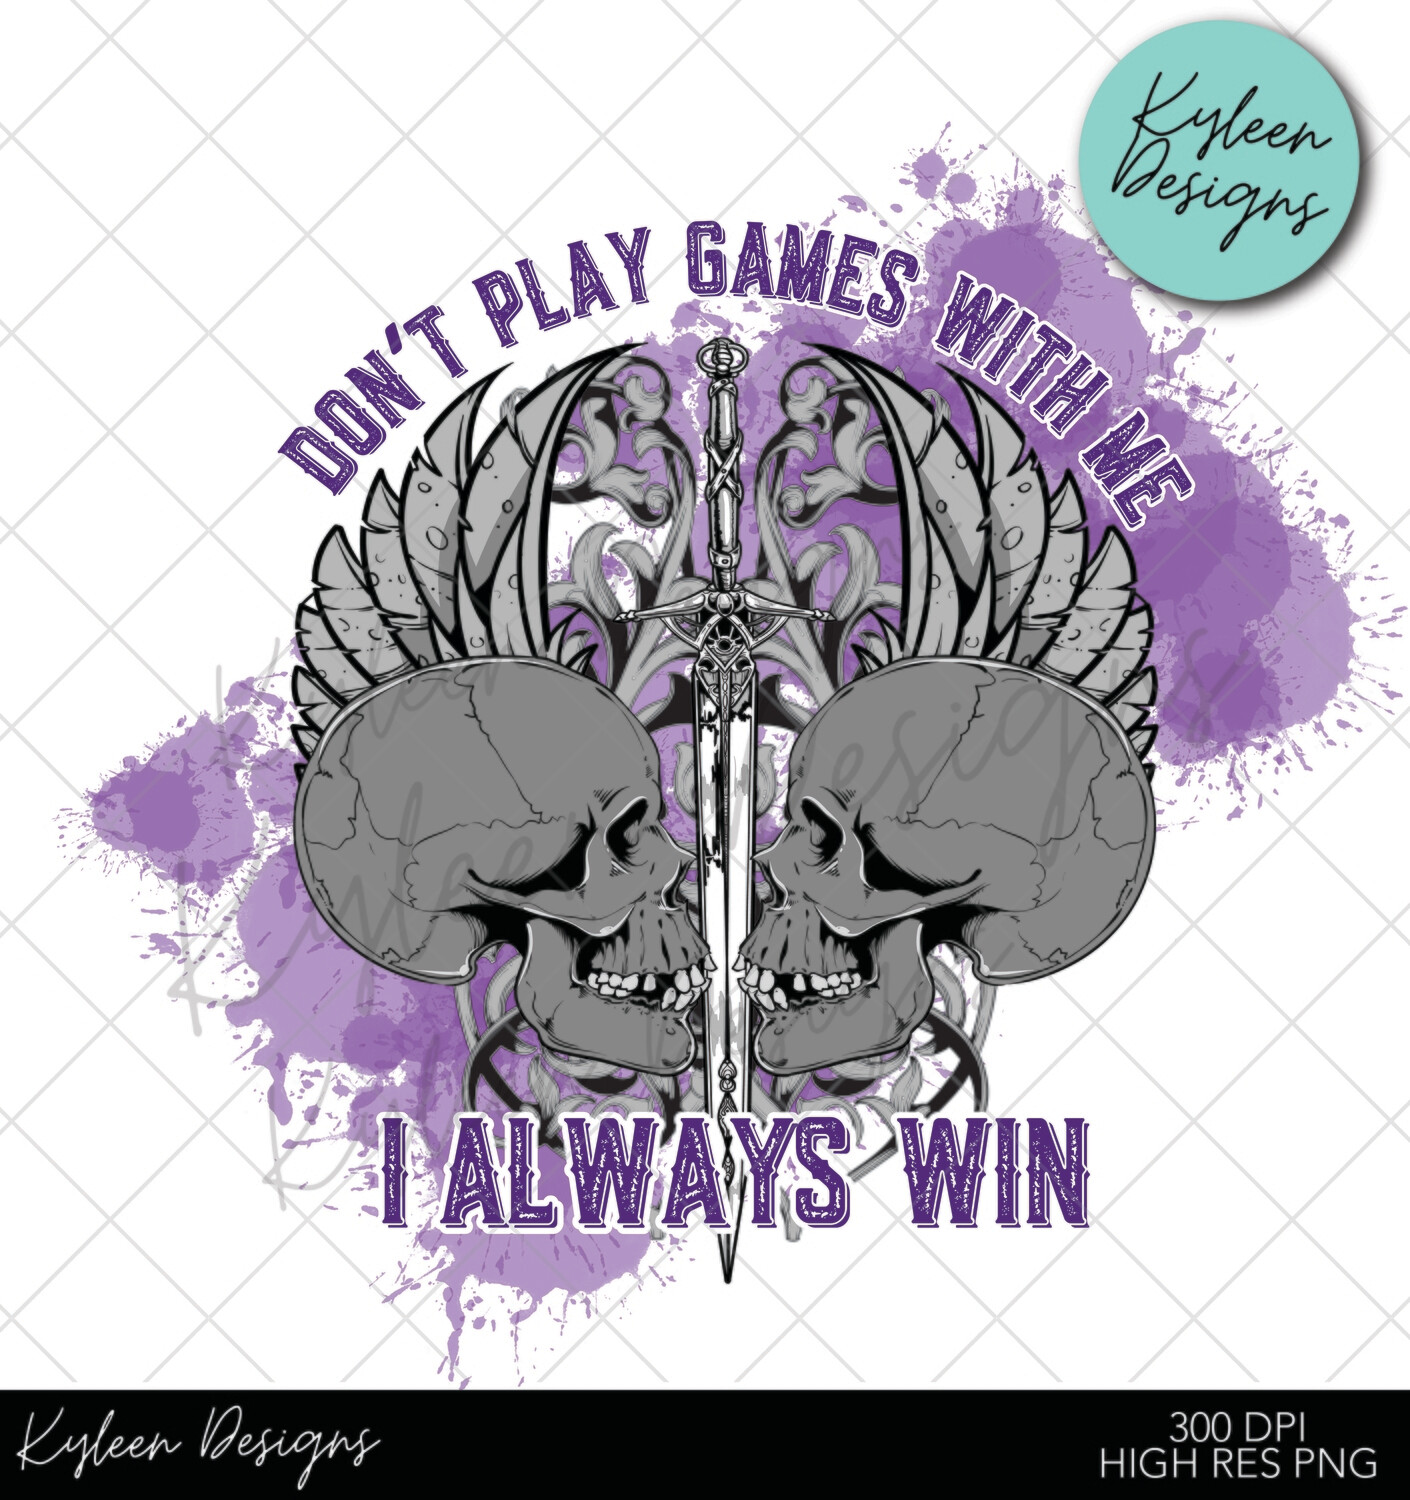 Don't play games with me for sublimation, waterslide High res PNG digital file